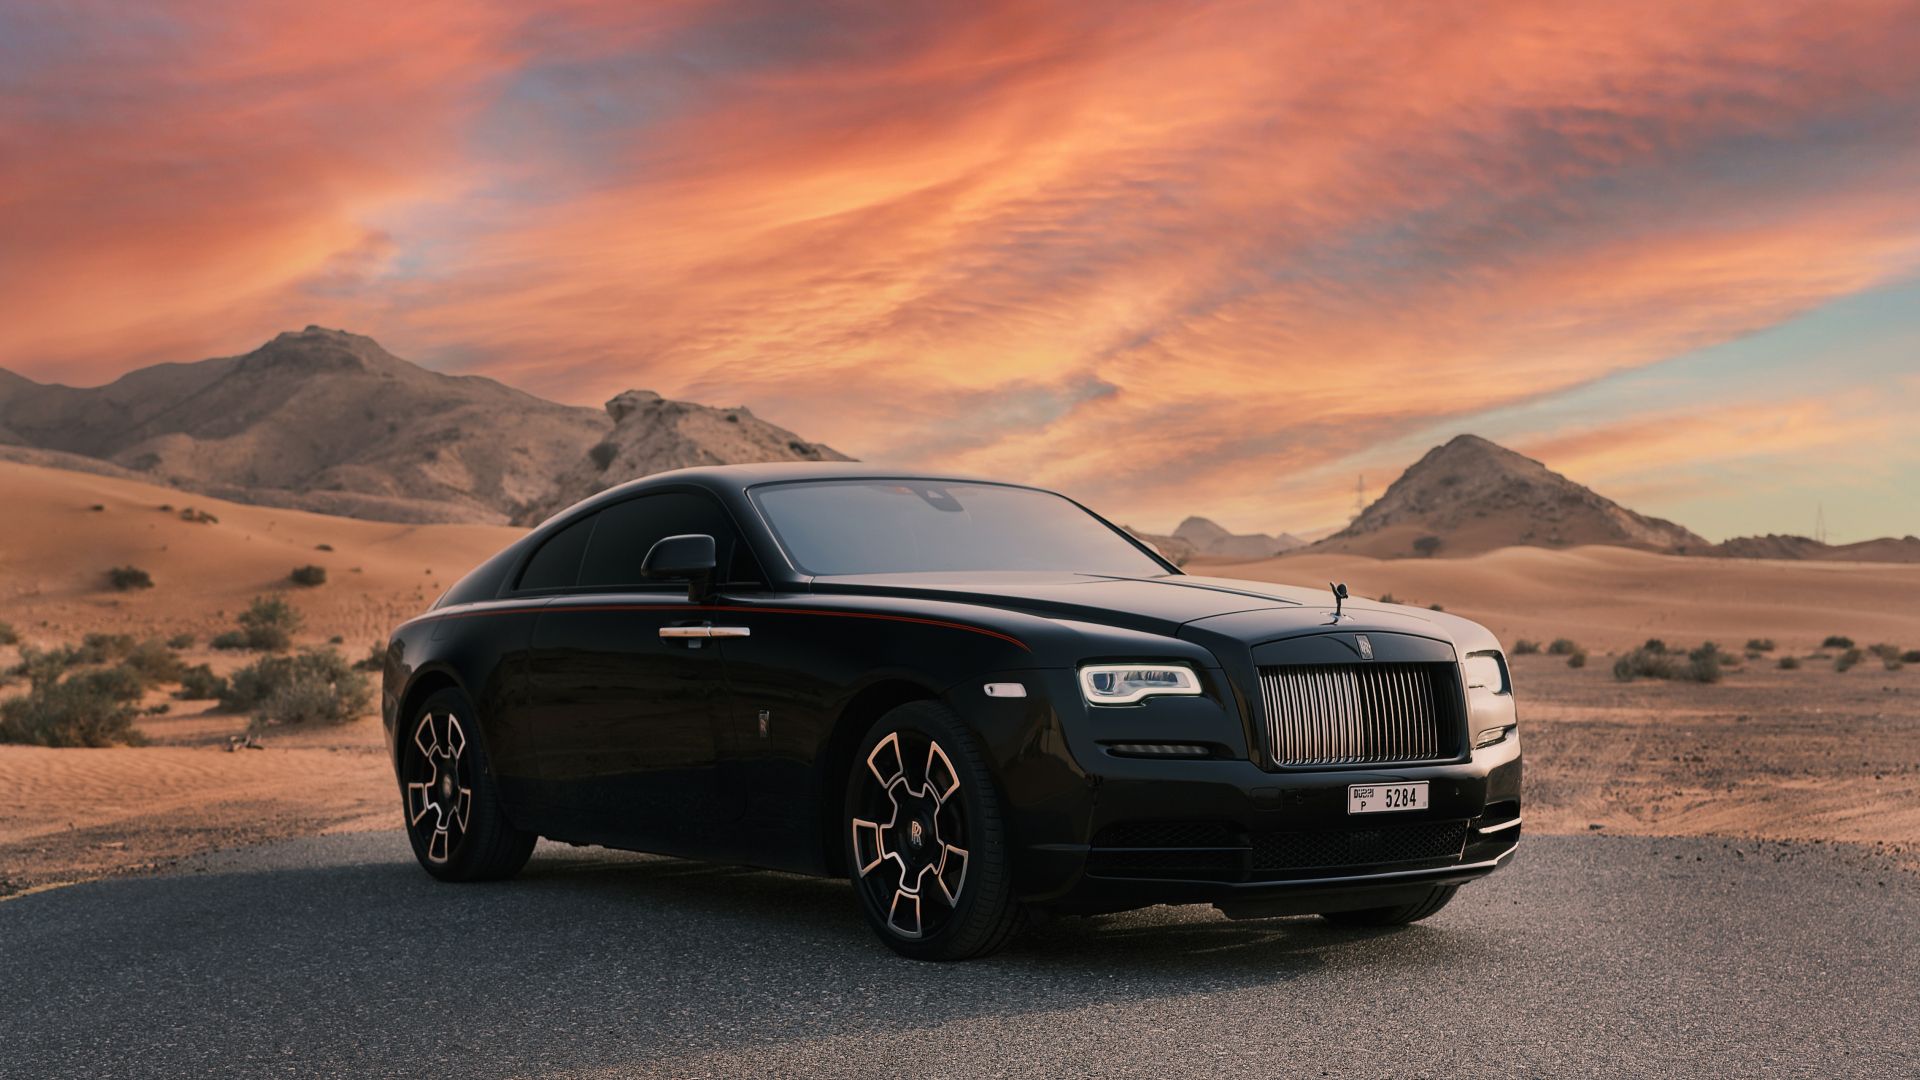 The 8 best RollsRoyce cars of all time  From Silver Ghost to Phantom   YouTube